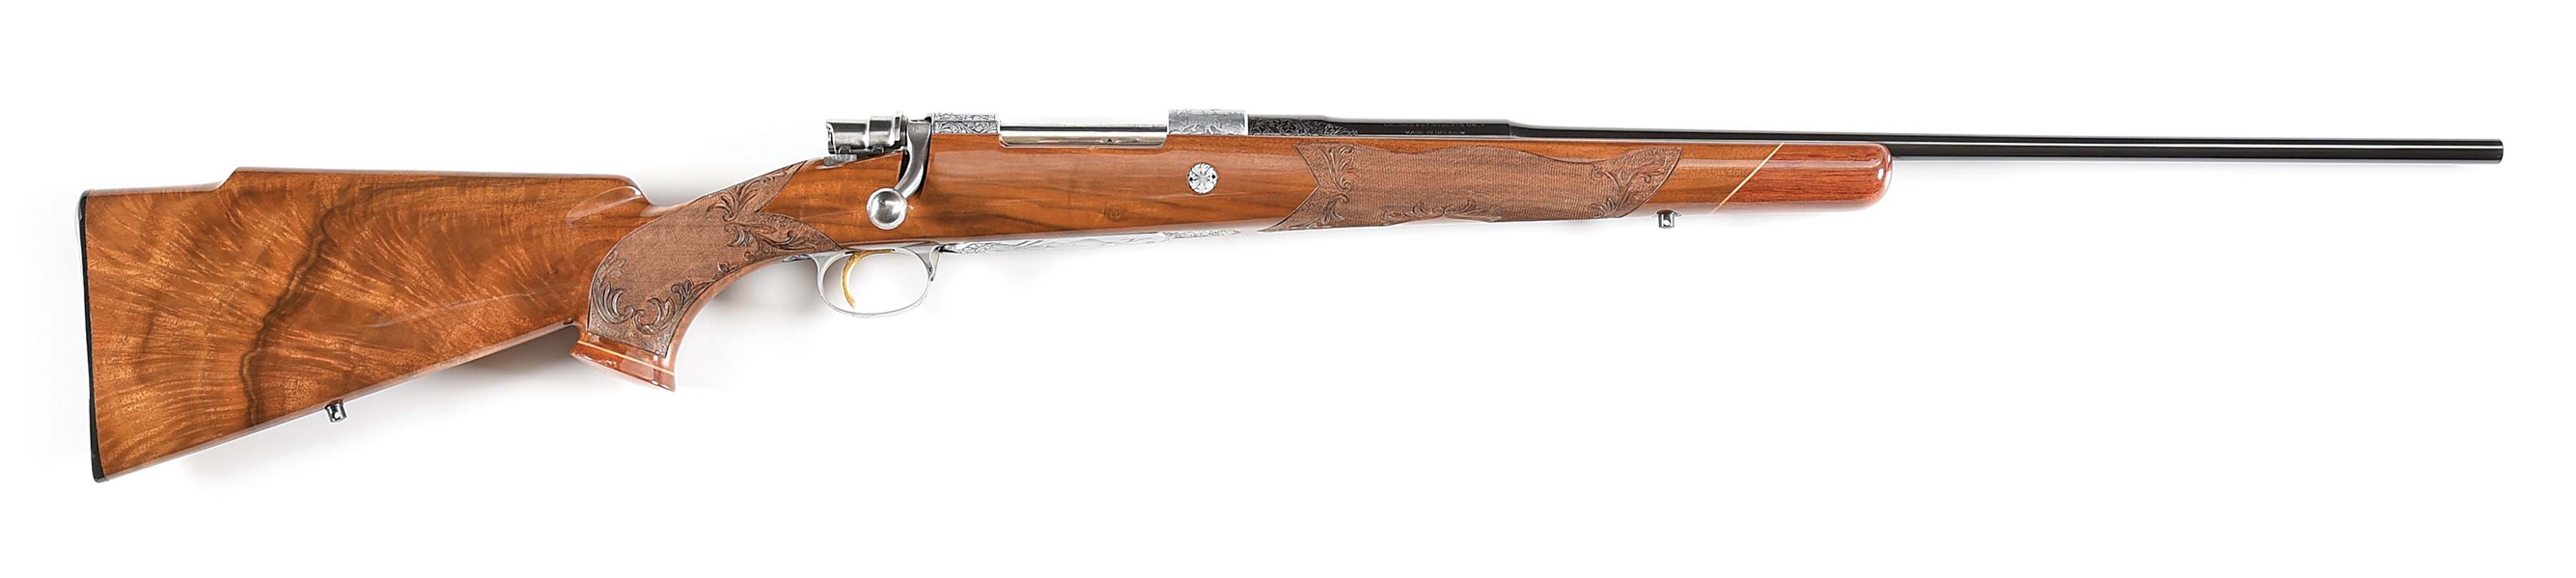 (M) BROWNING HIGH POWER OLYMPIAN GRADE BOLT ACTION RIFLE.